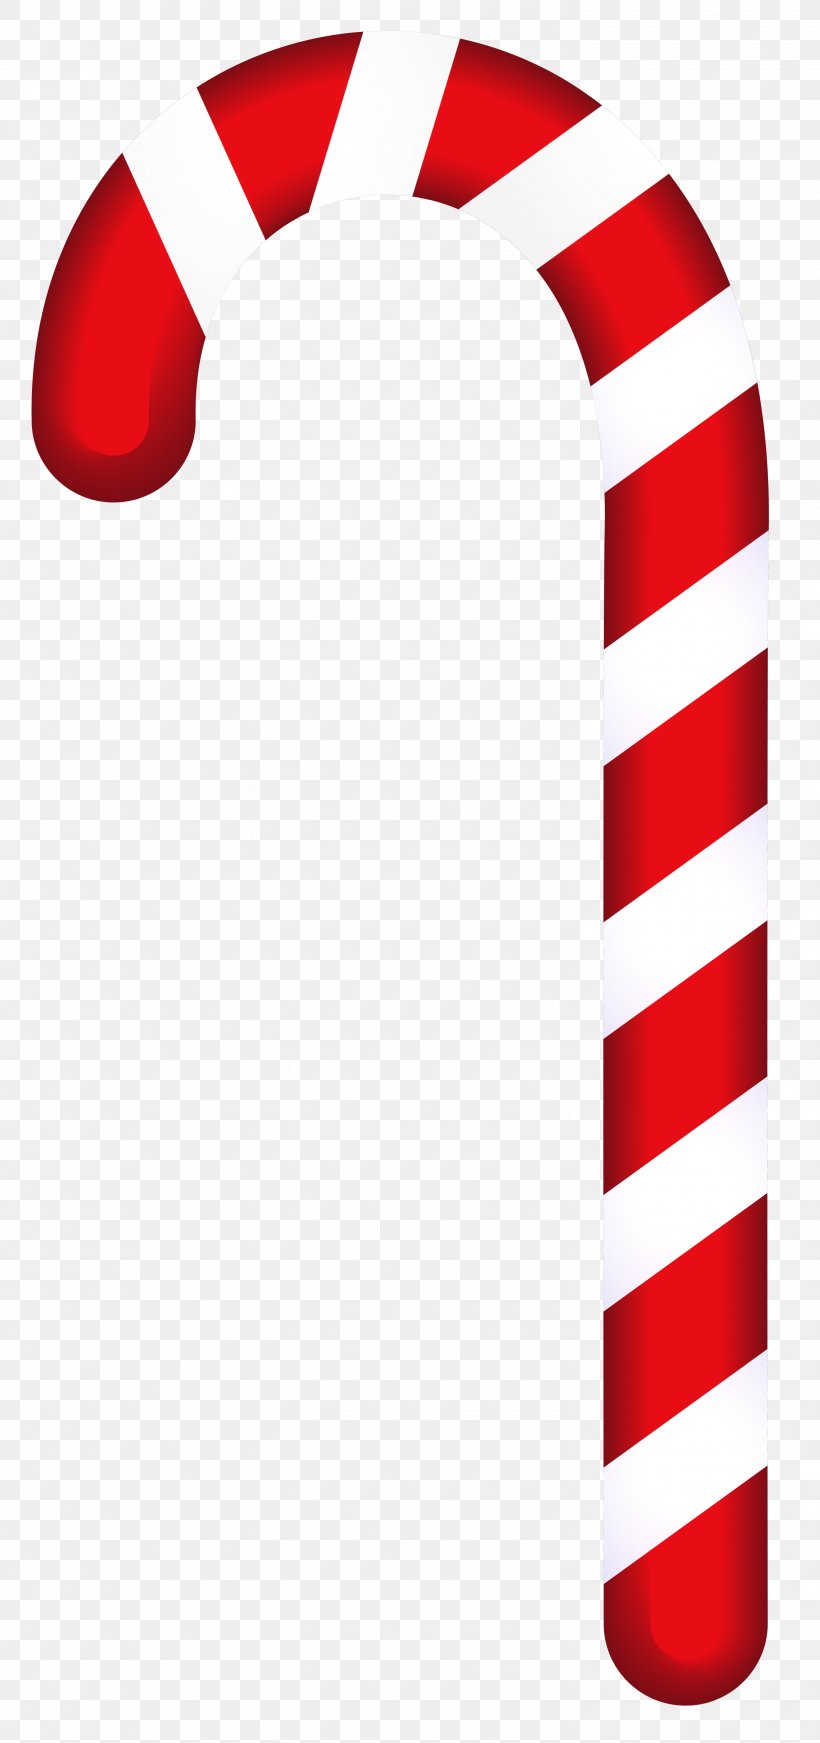 Candy Cane Christmas Clip Art, PNG, 2948x6268px, Candy Cane, Candy, Christmas, Food, Presentation Download Free